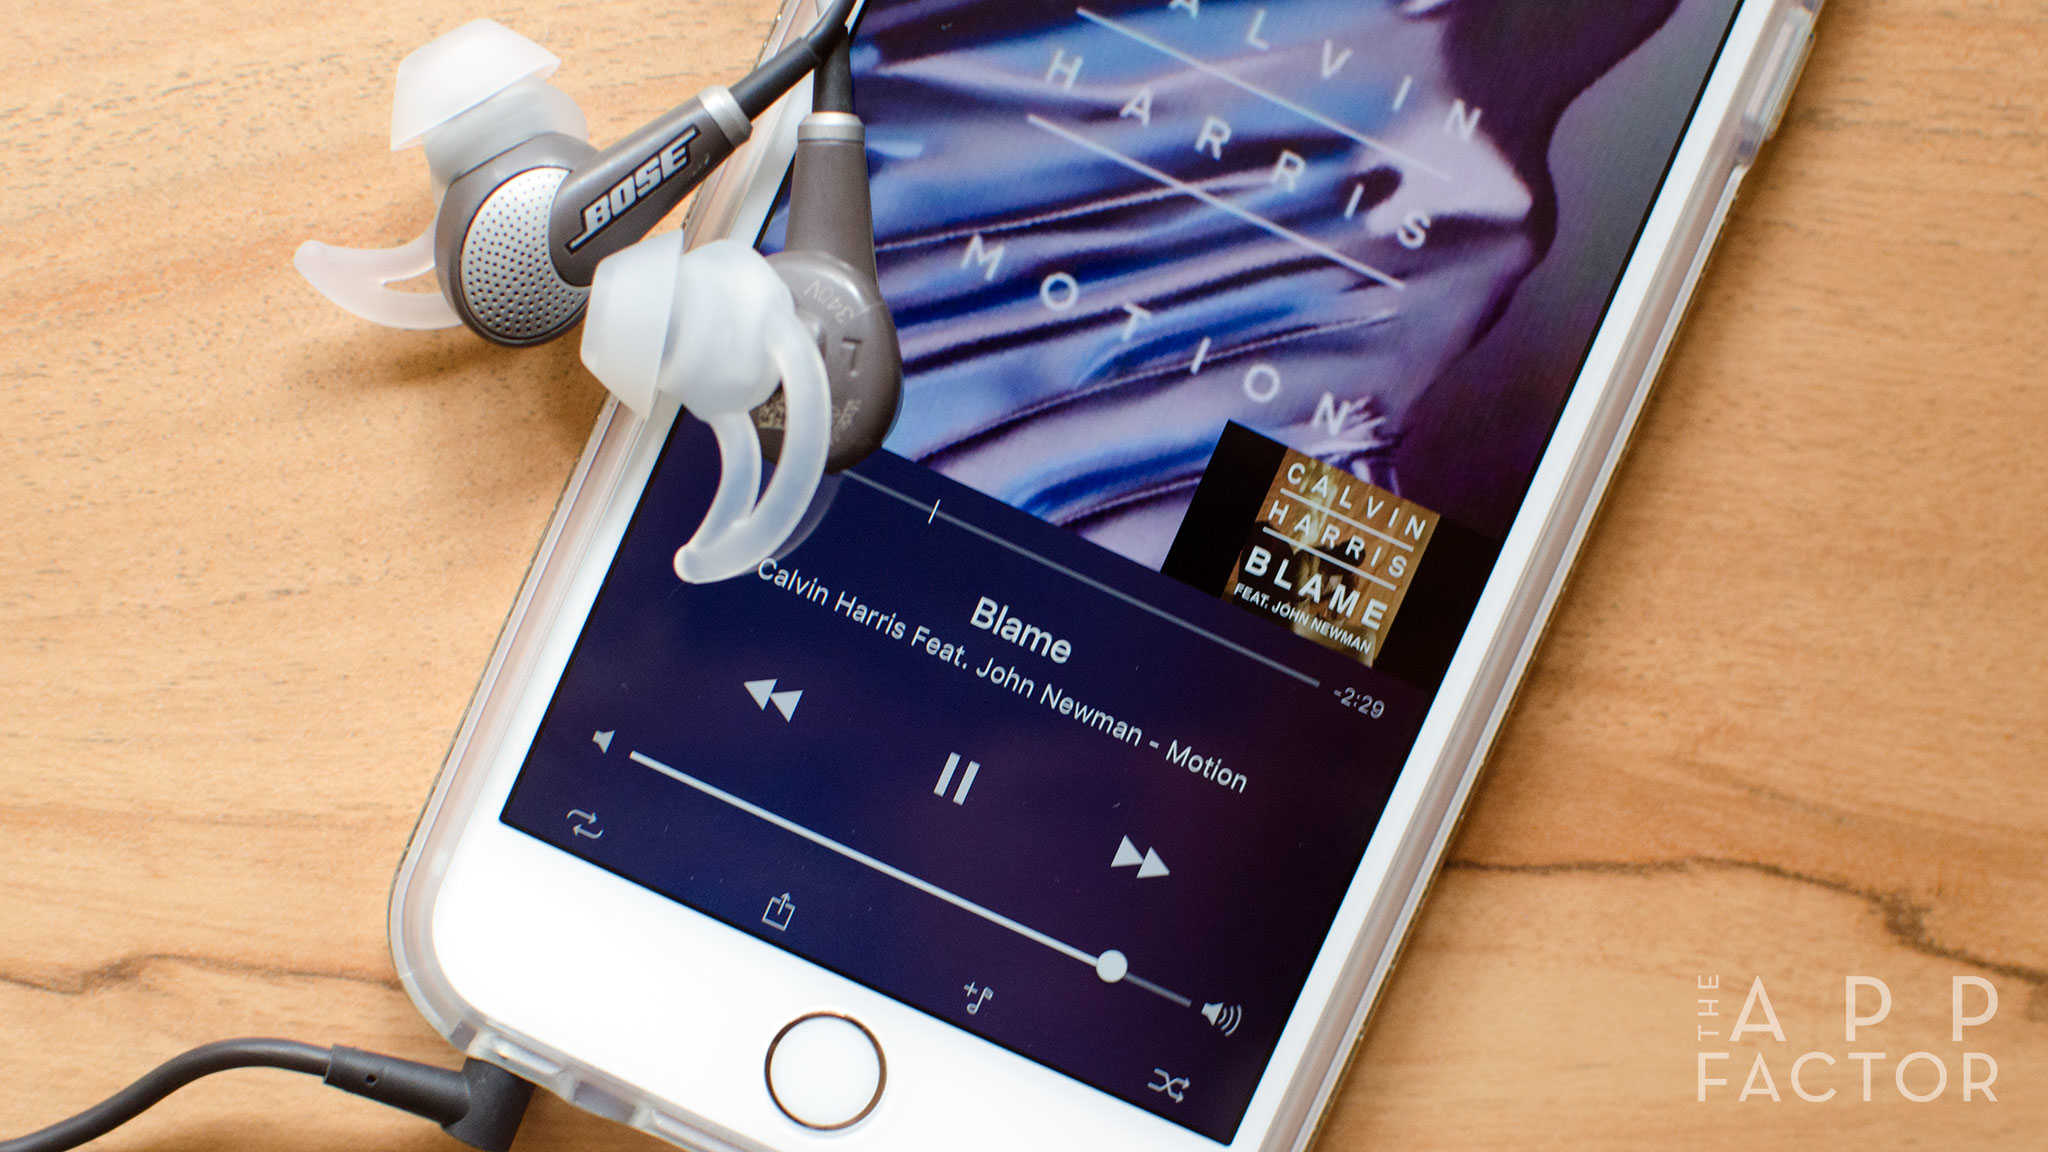 Want to enhance your Apple Music experience? Try these 4 apps!